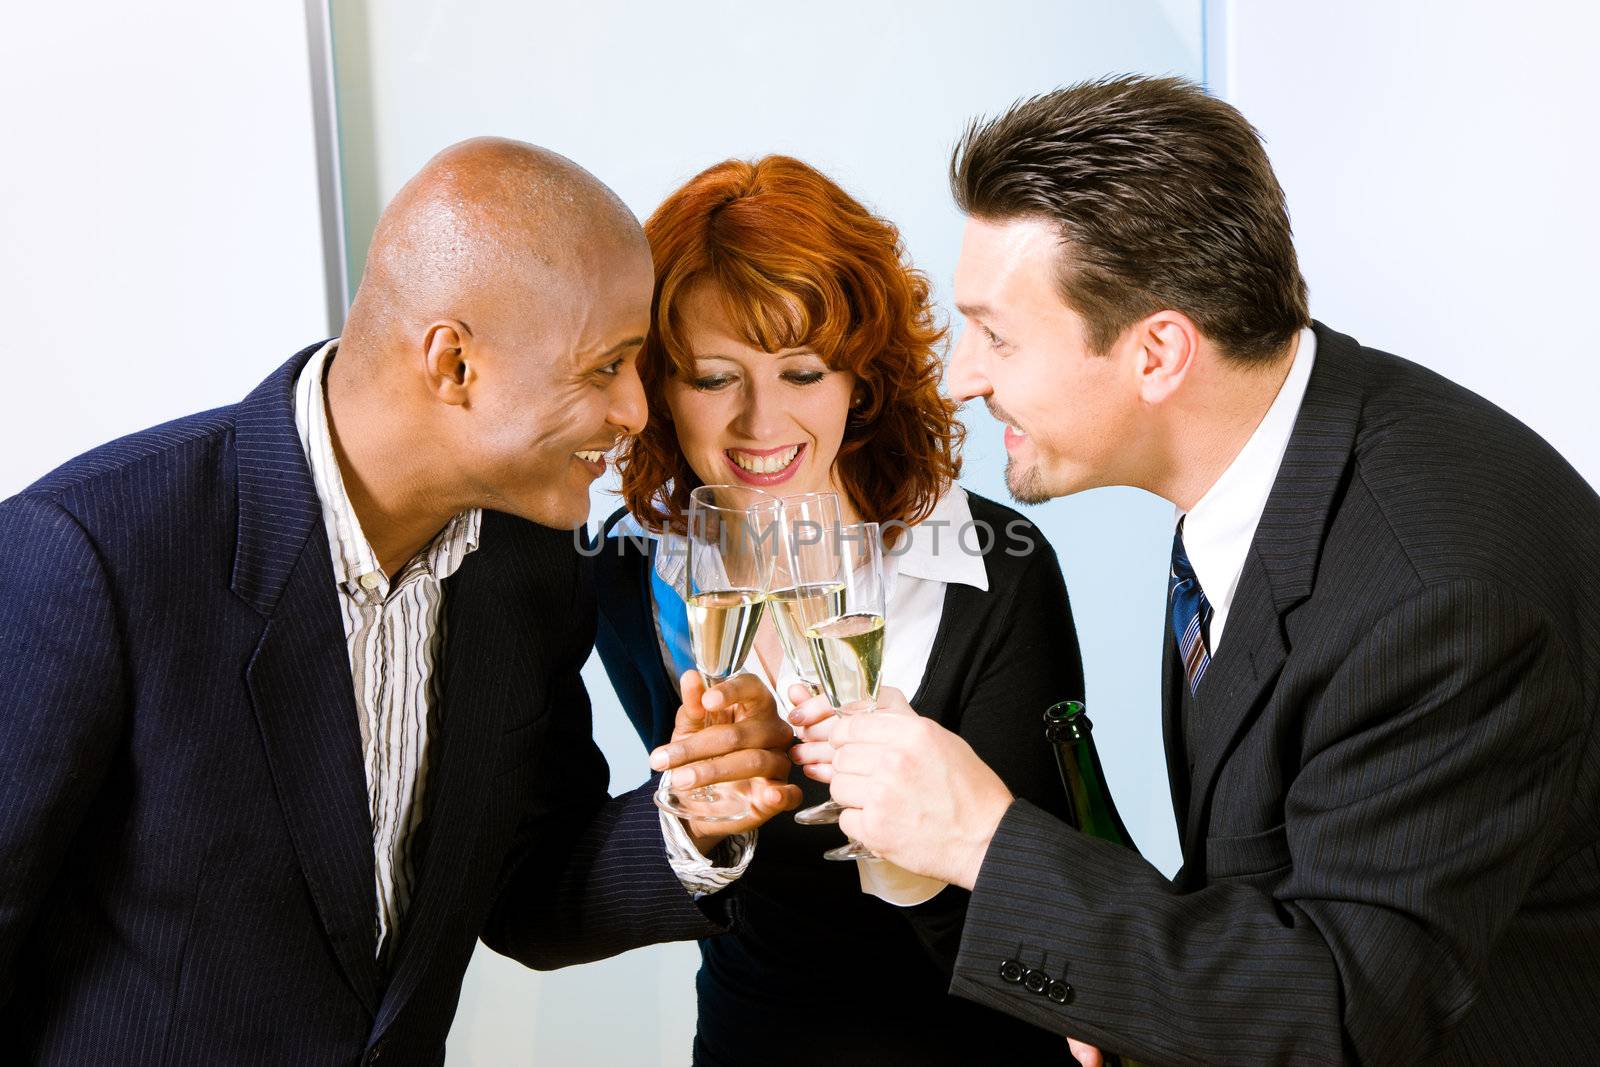 People clinking their glasses of champagne at a reception or party